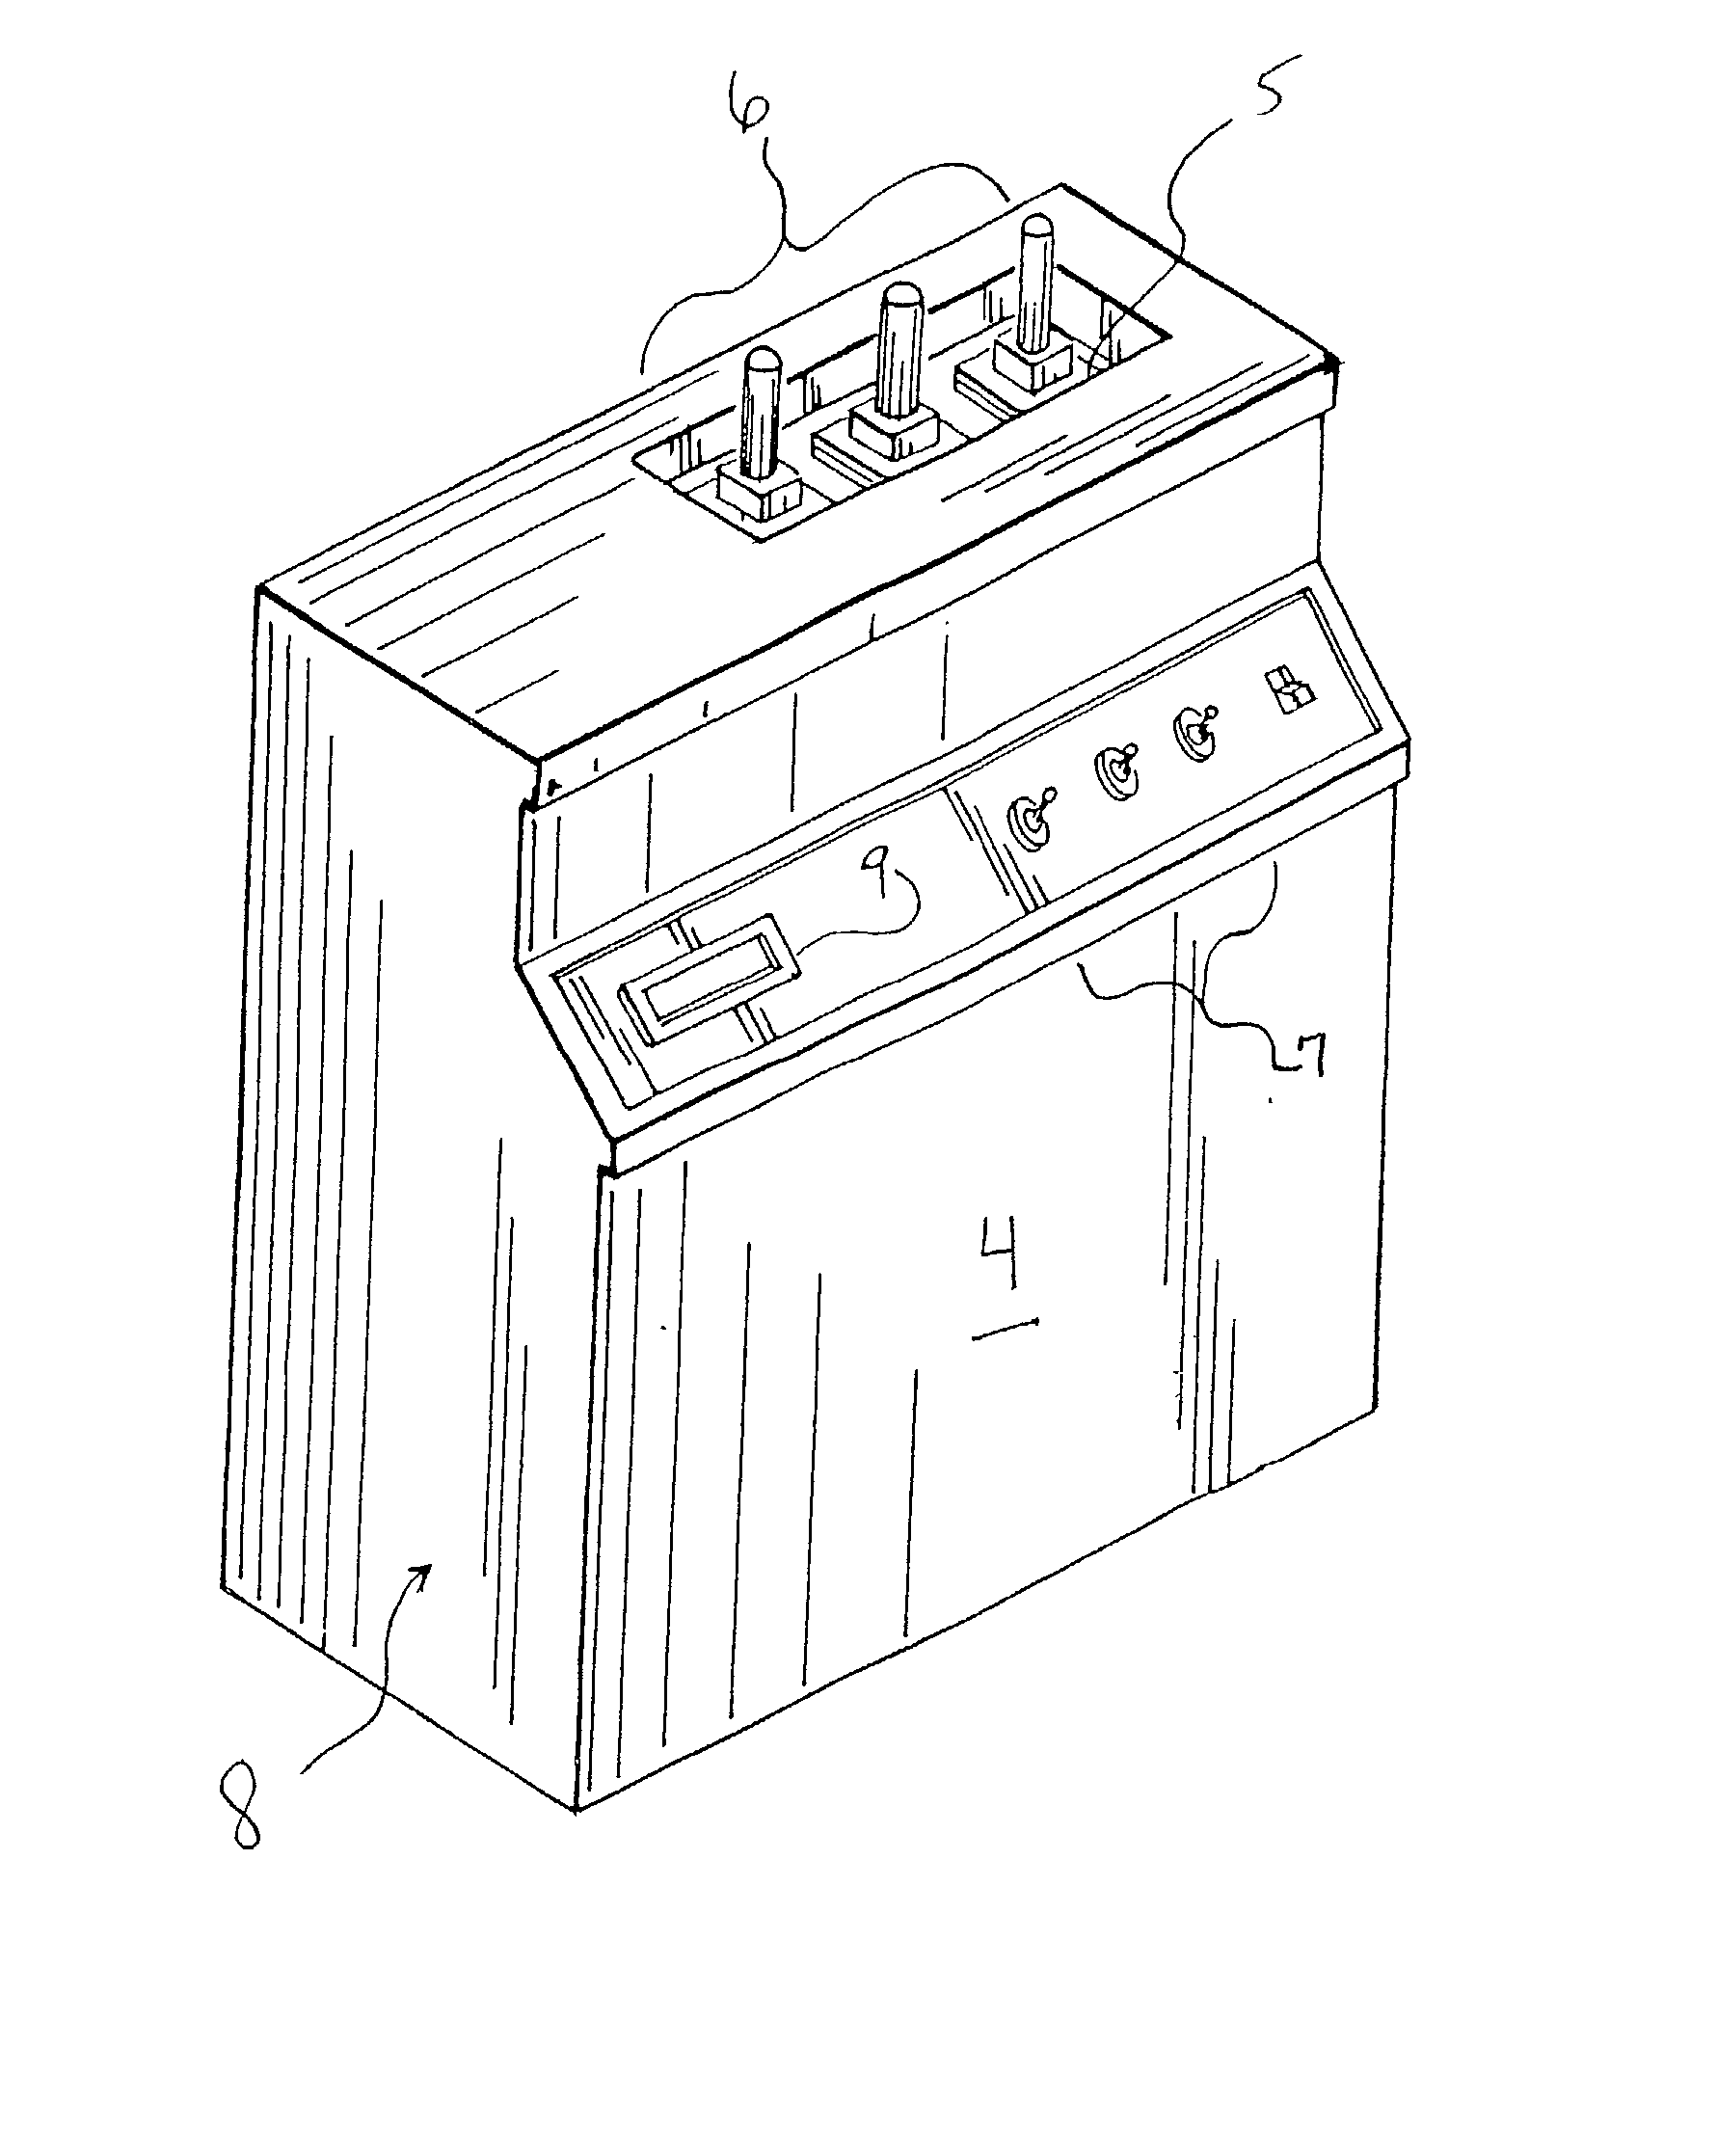 Hand-held, heat sink cryoprobe, system for heat extraction thereof, and method therefore